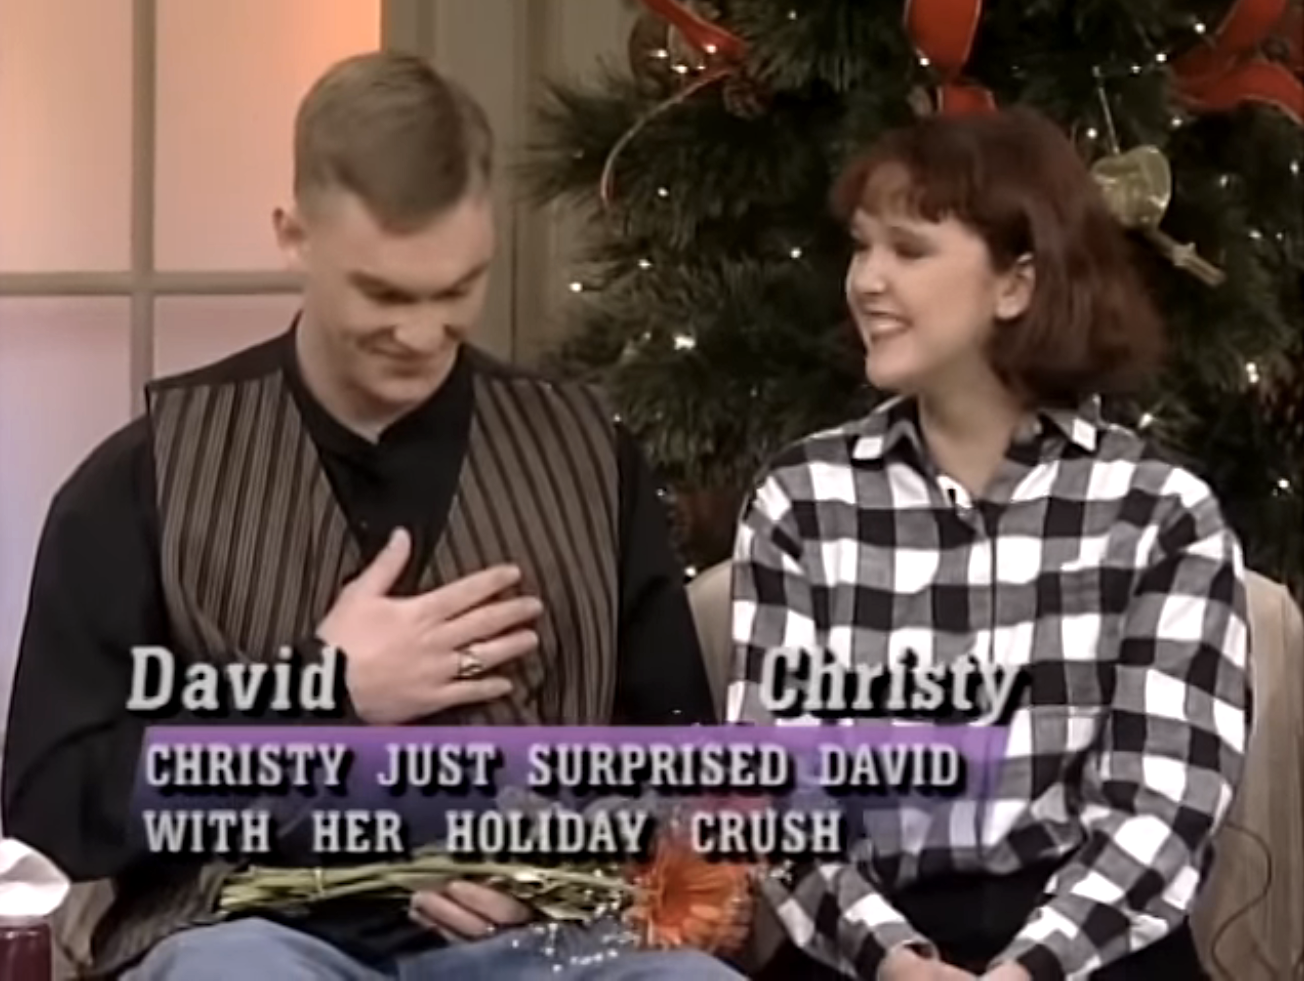 &quot;Christy just surprised David with her holiday crush&quot;